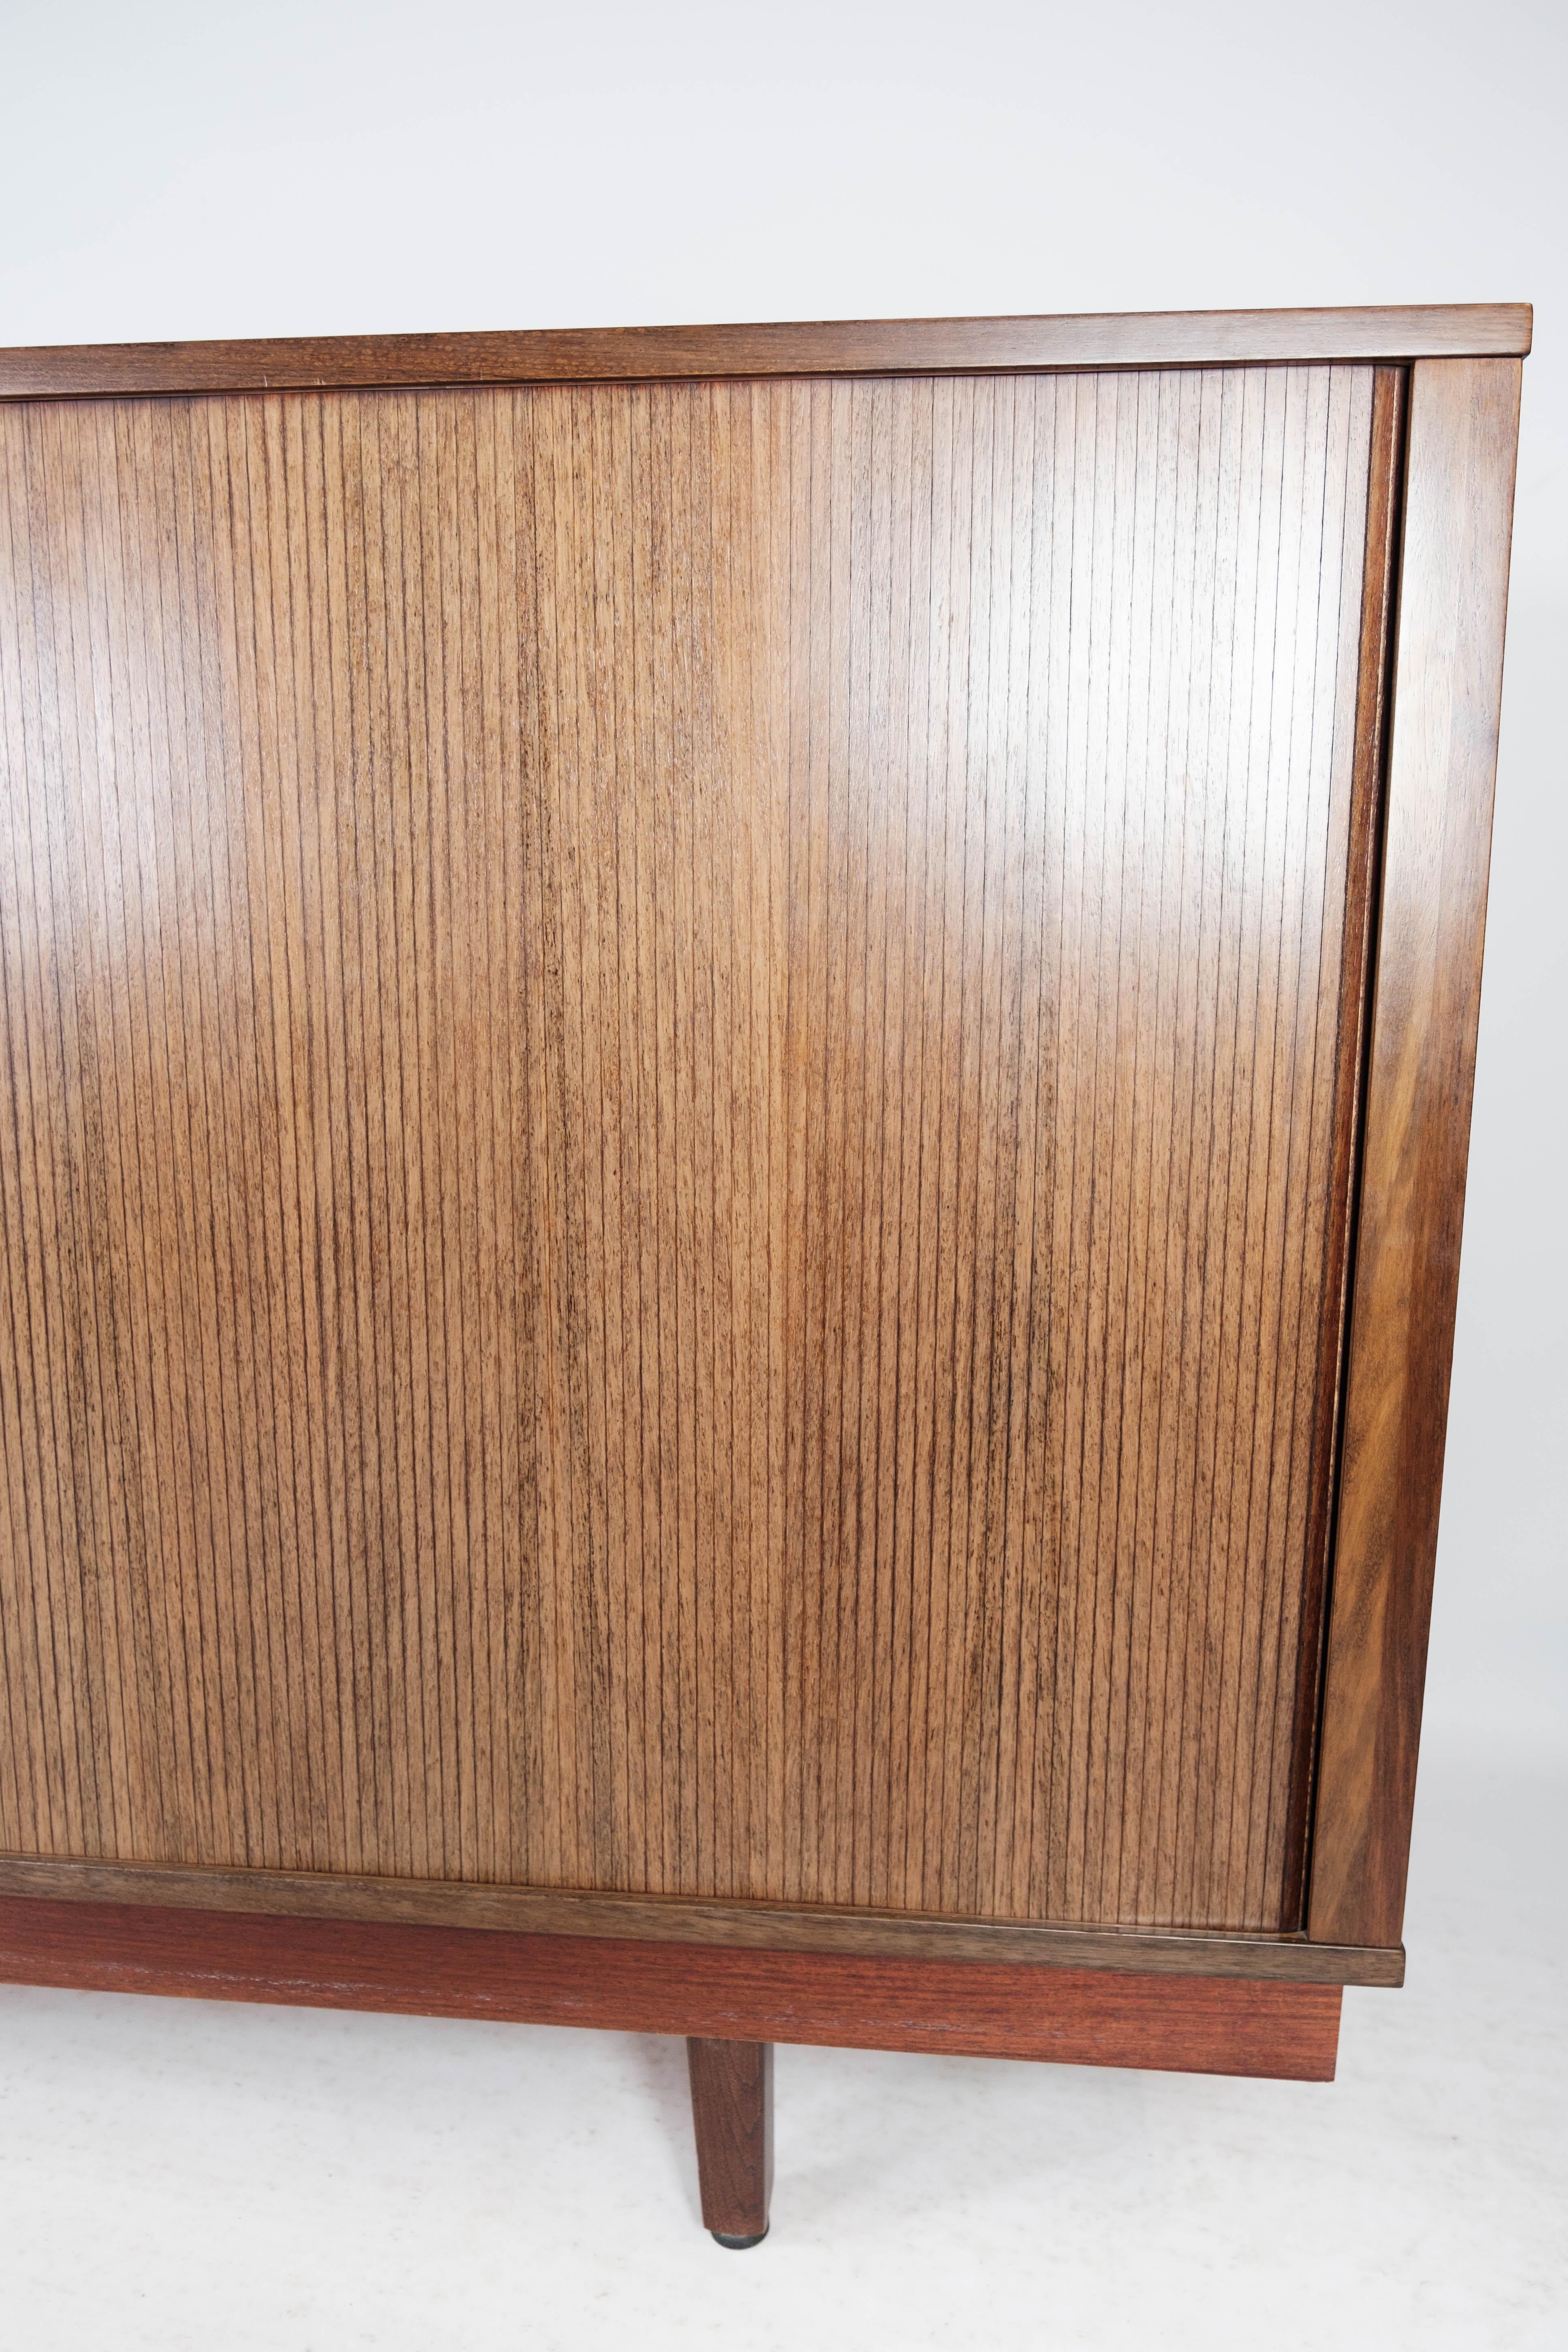 Low Sideboard with Sliding Doors in Rosewood of Danish Design from the 1960s 6